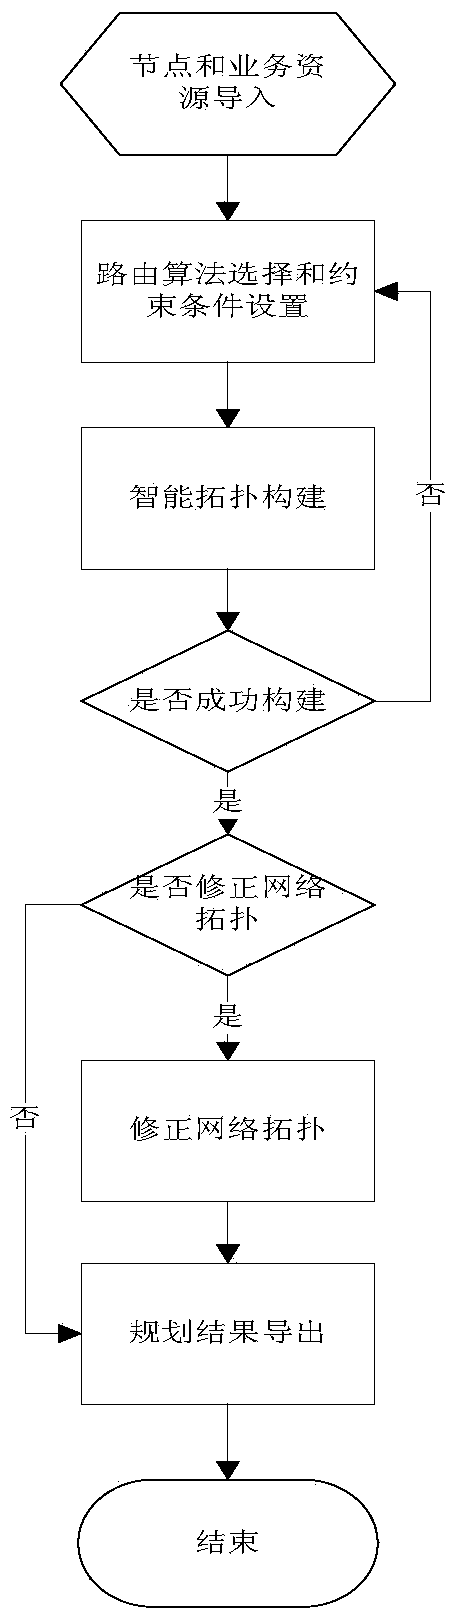 Computer automatic constructing method of optical network topology